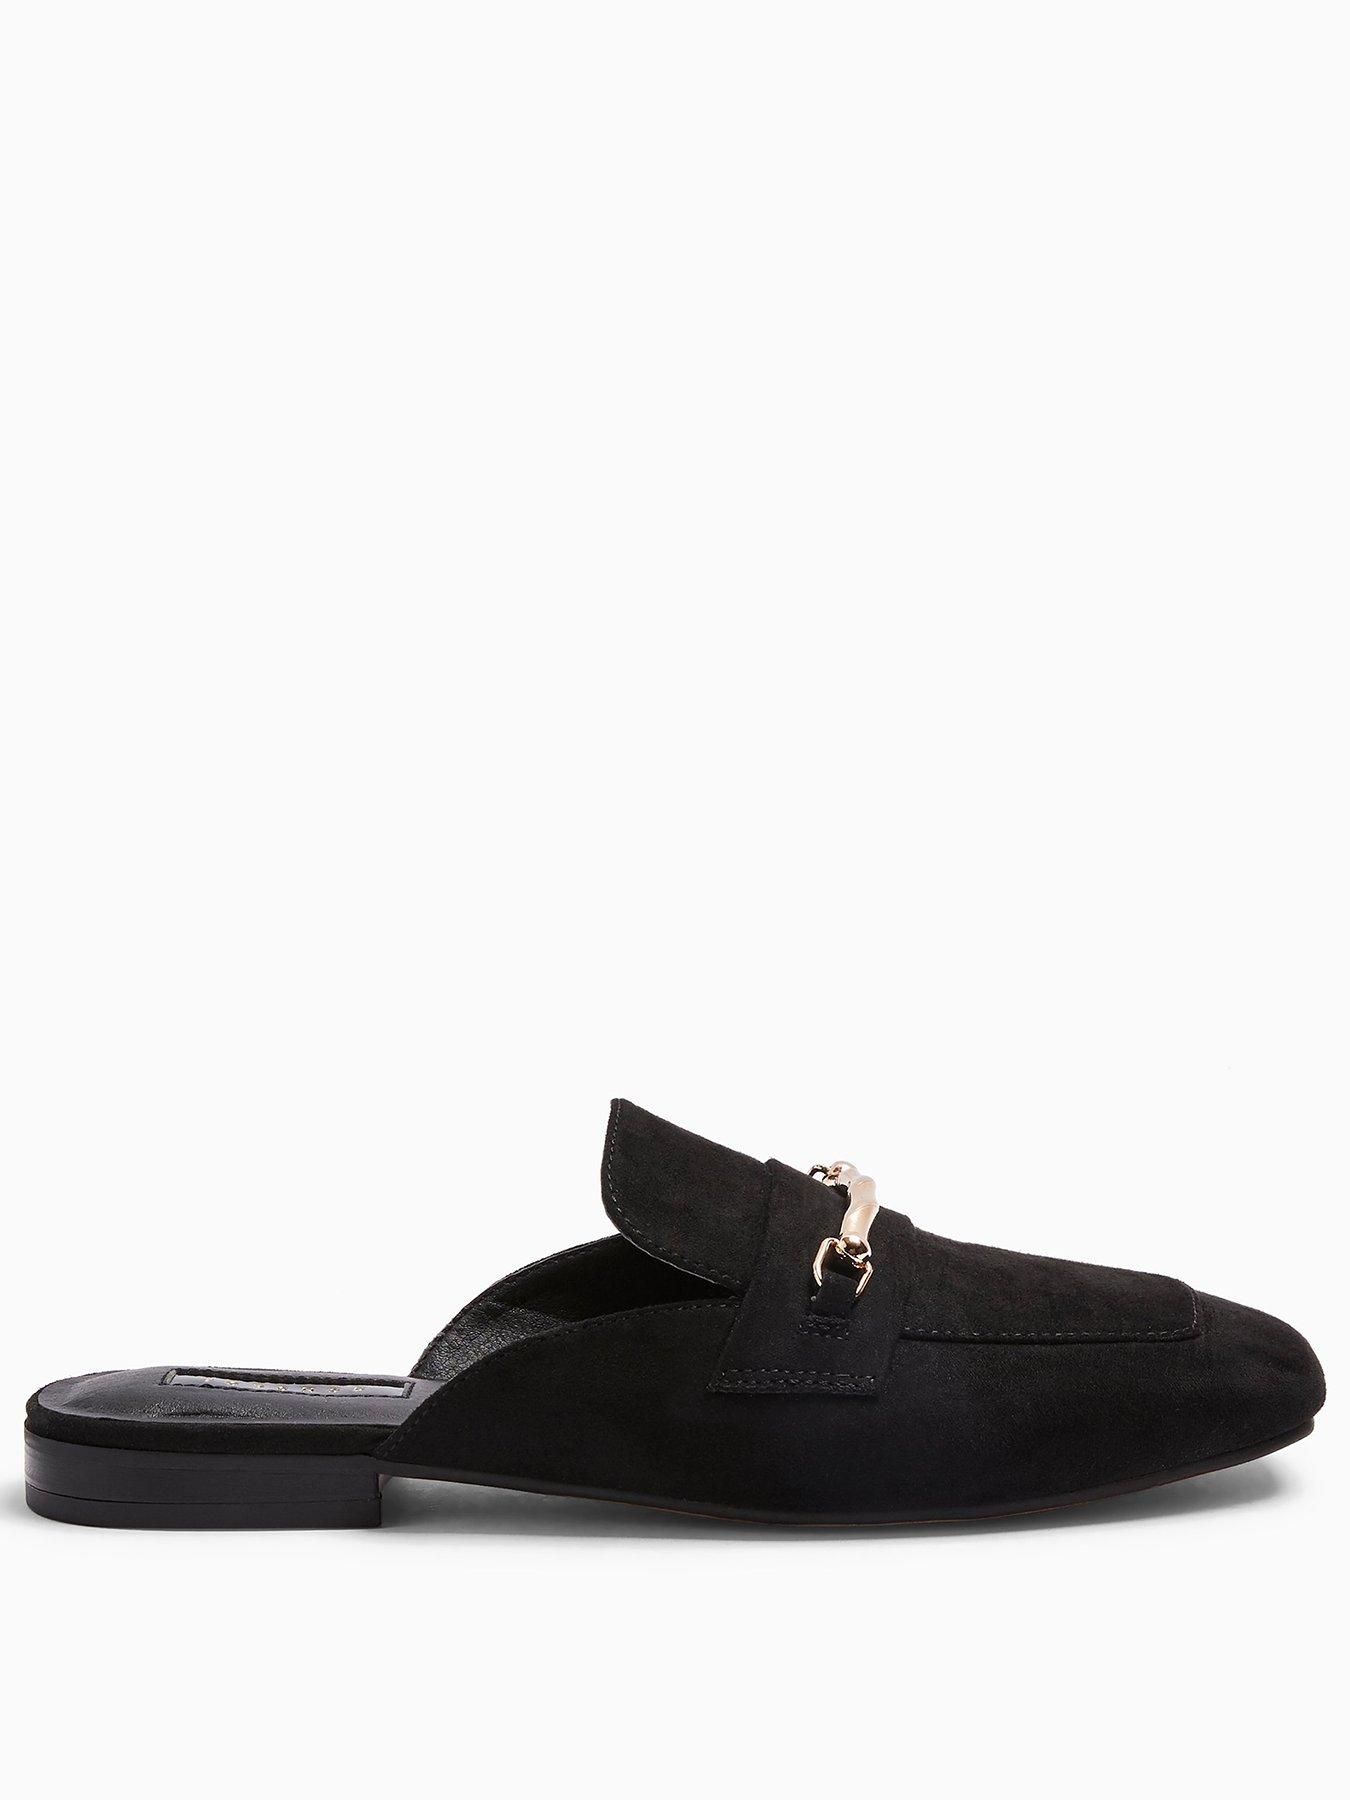 topshop loafers